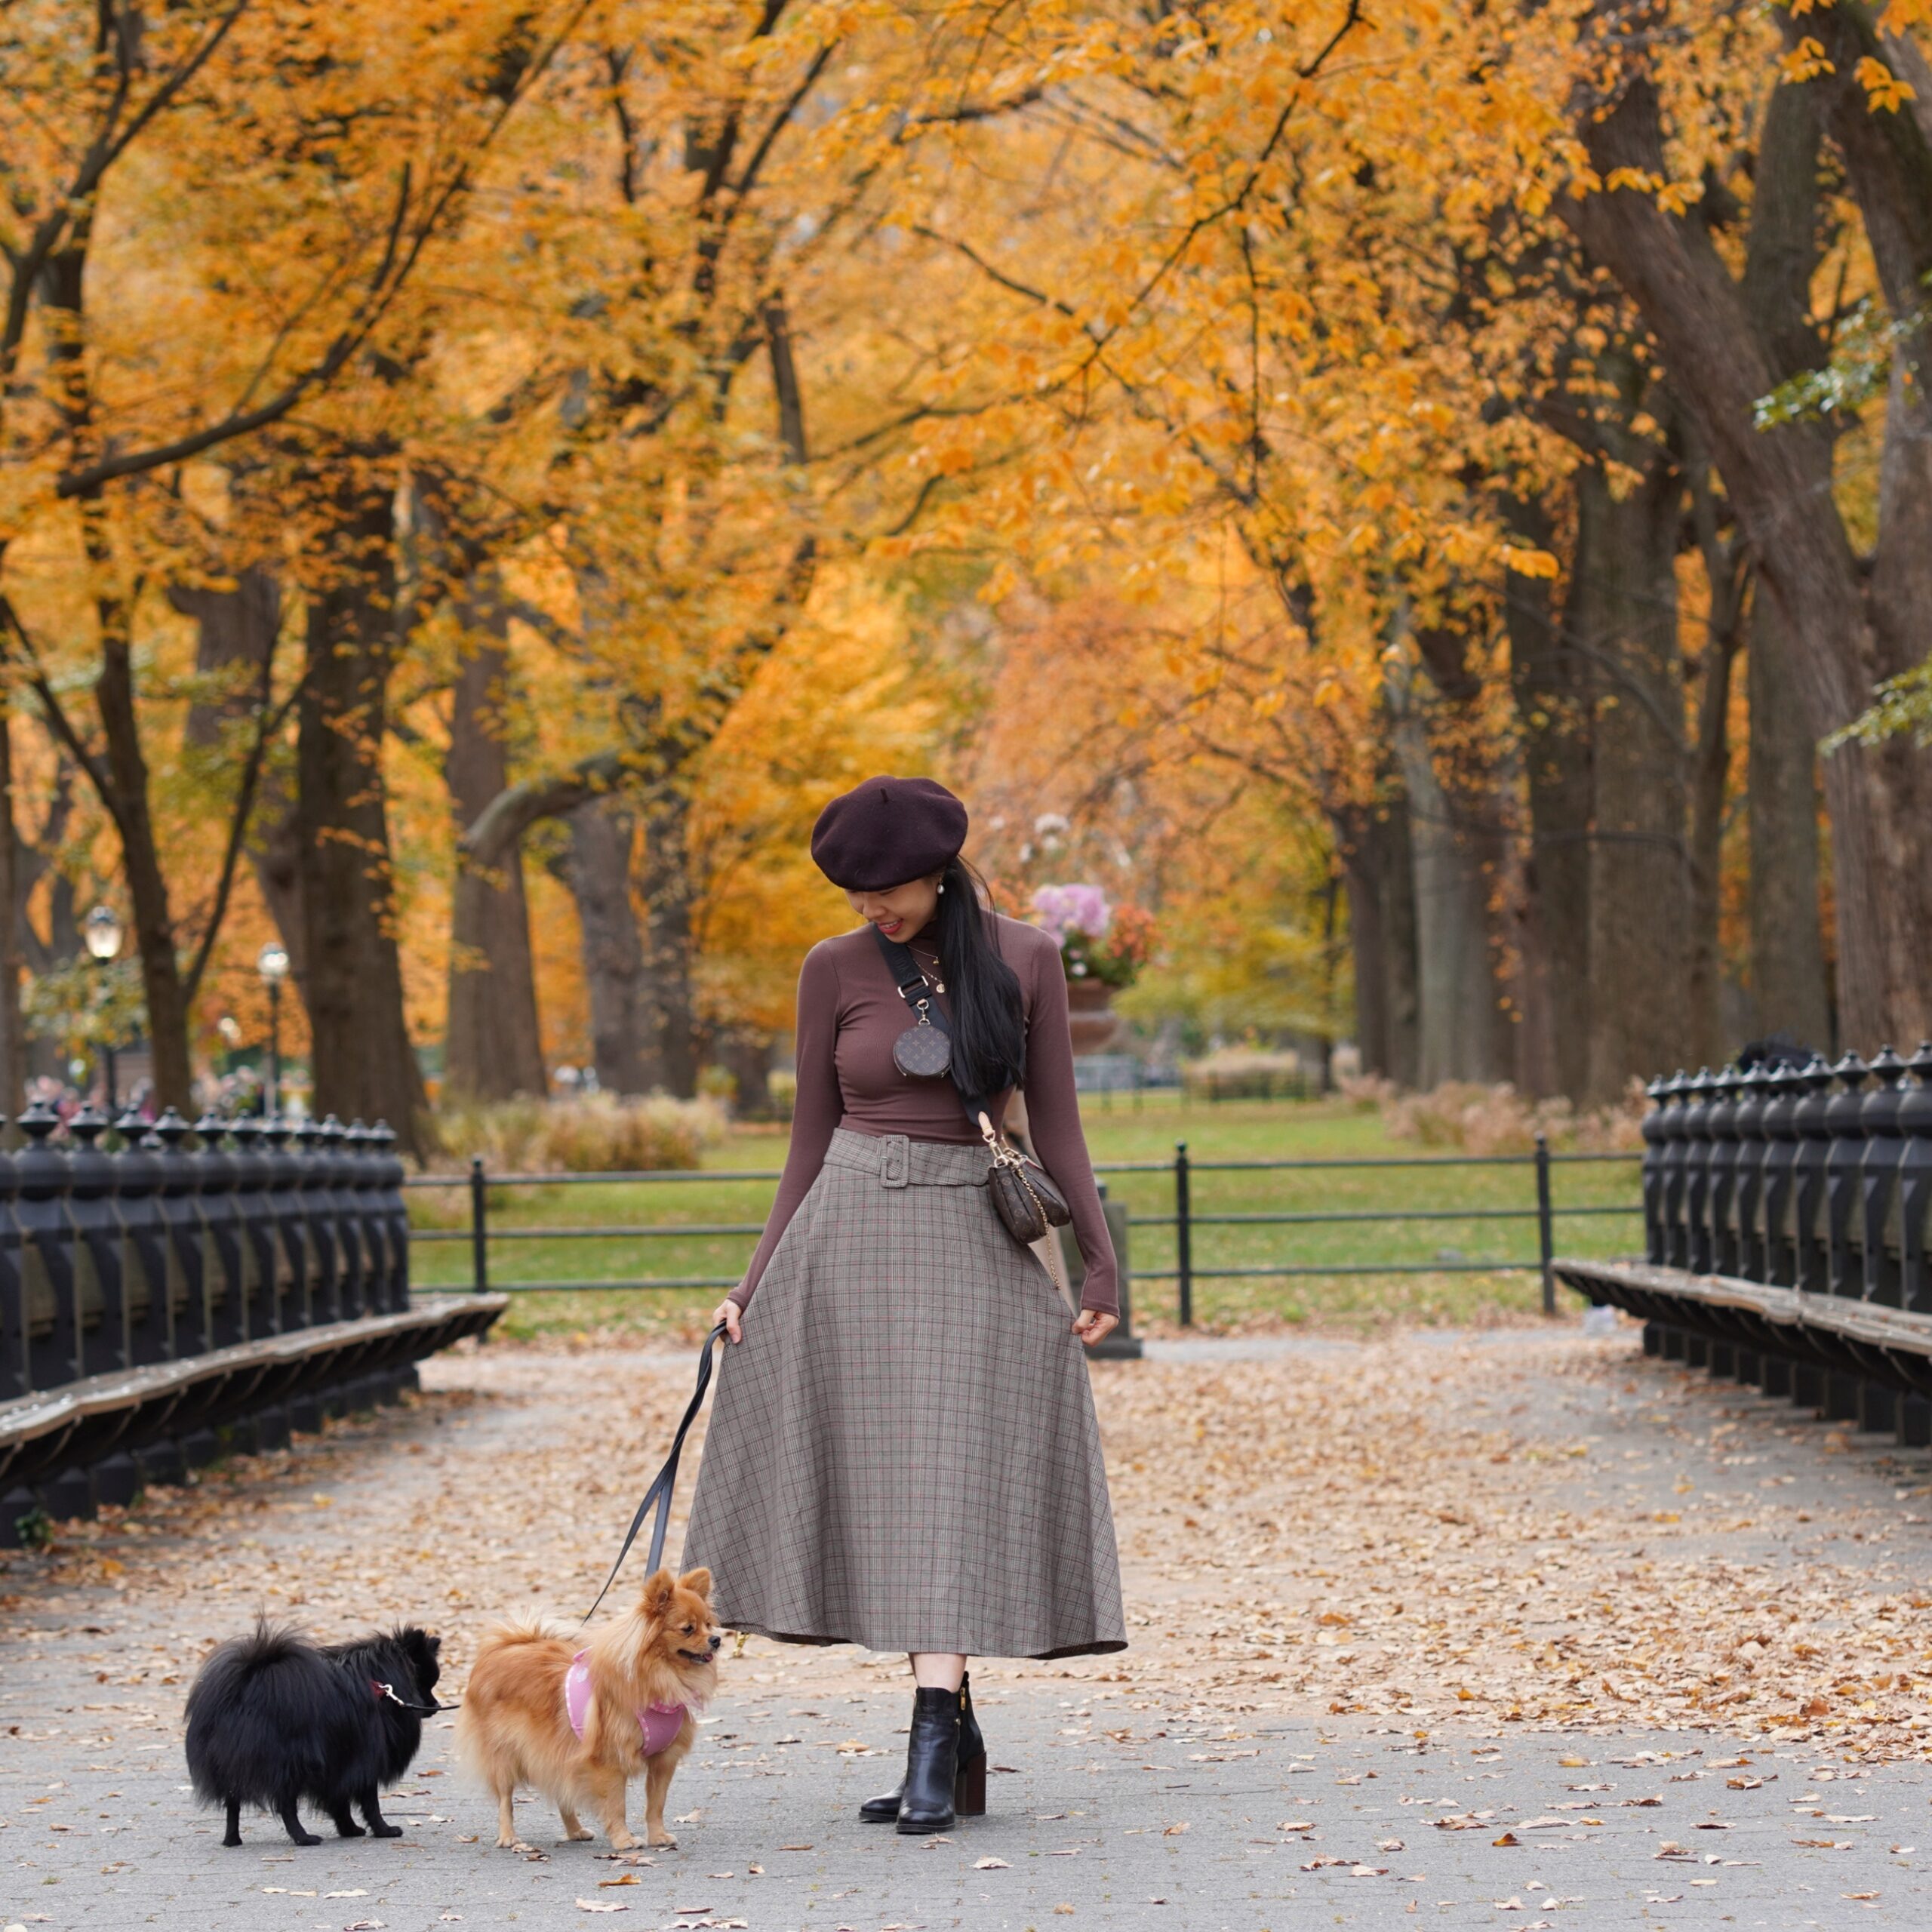 Vivian R Tang poses in dark academia preppy Tommy Hilfiger, Ralph Lauren plaid skirt / fashion in Central Park New York City NYC with her pomeranians against a fall setting